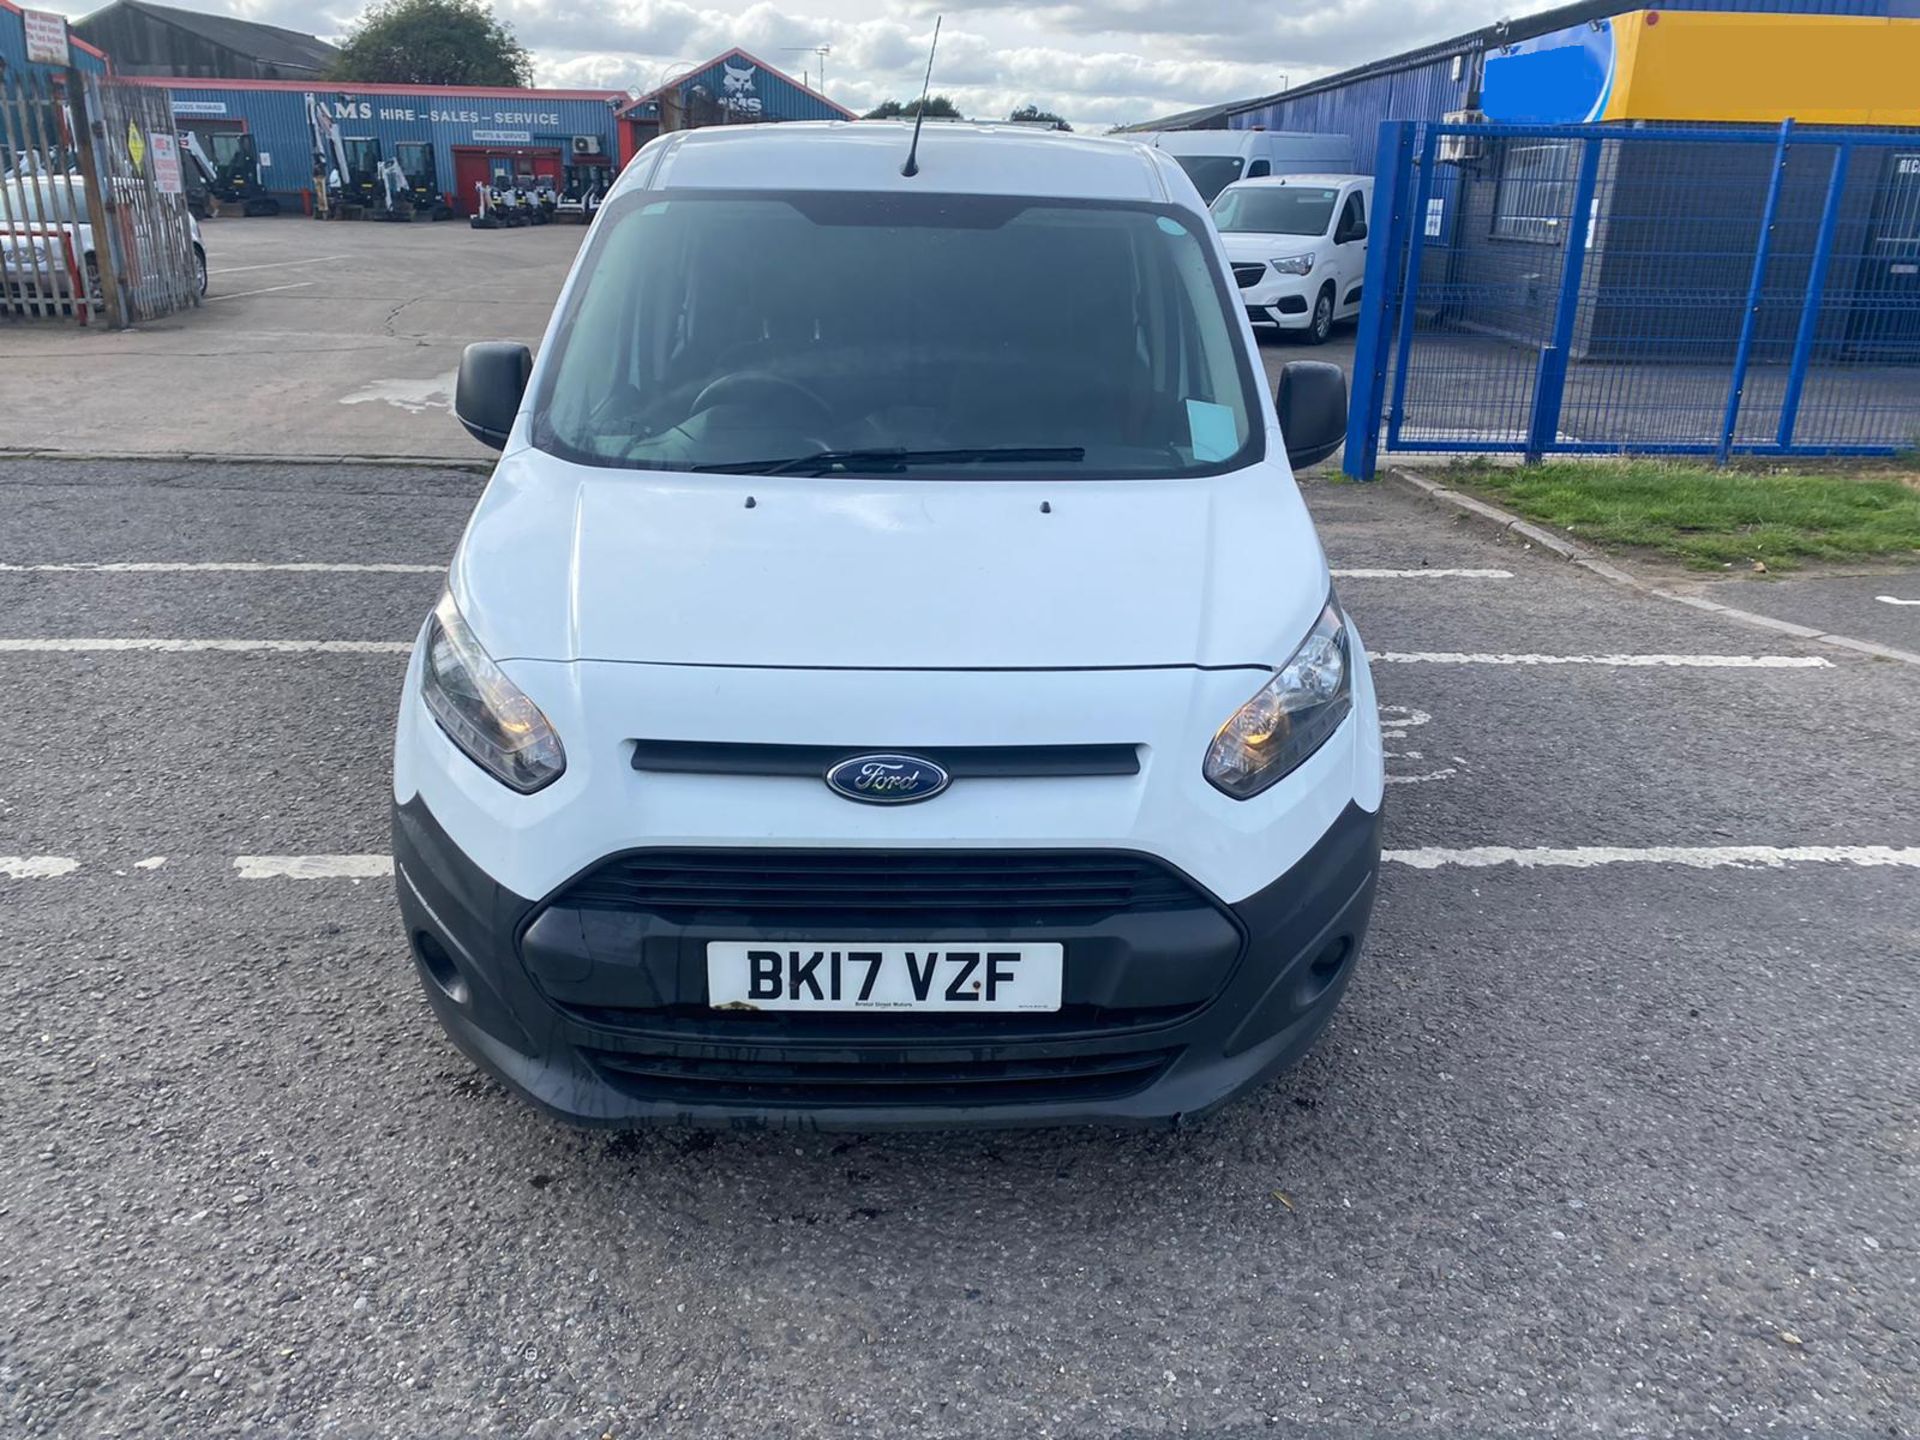 2017 17 FORD TRANSIT CONNECT DOUBLE CAB PANEL VAN - 118K MILES - 5 SEATS - LWB - EURO 6. - Image 2 of 11